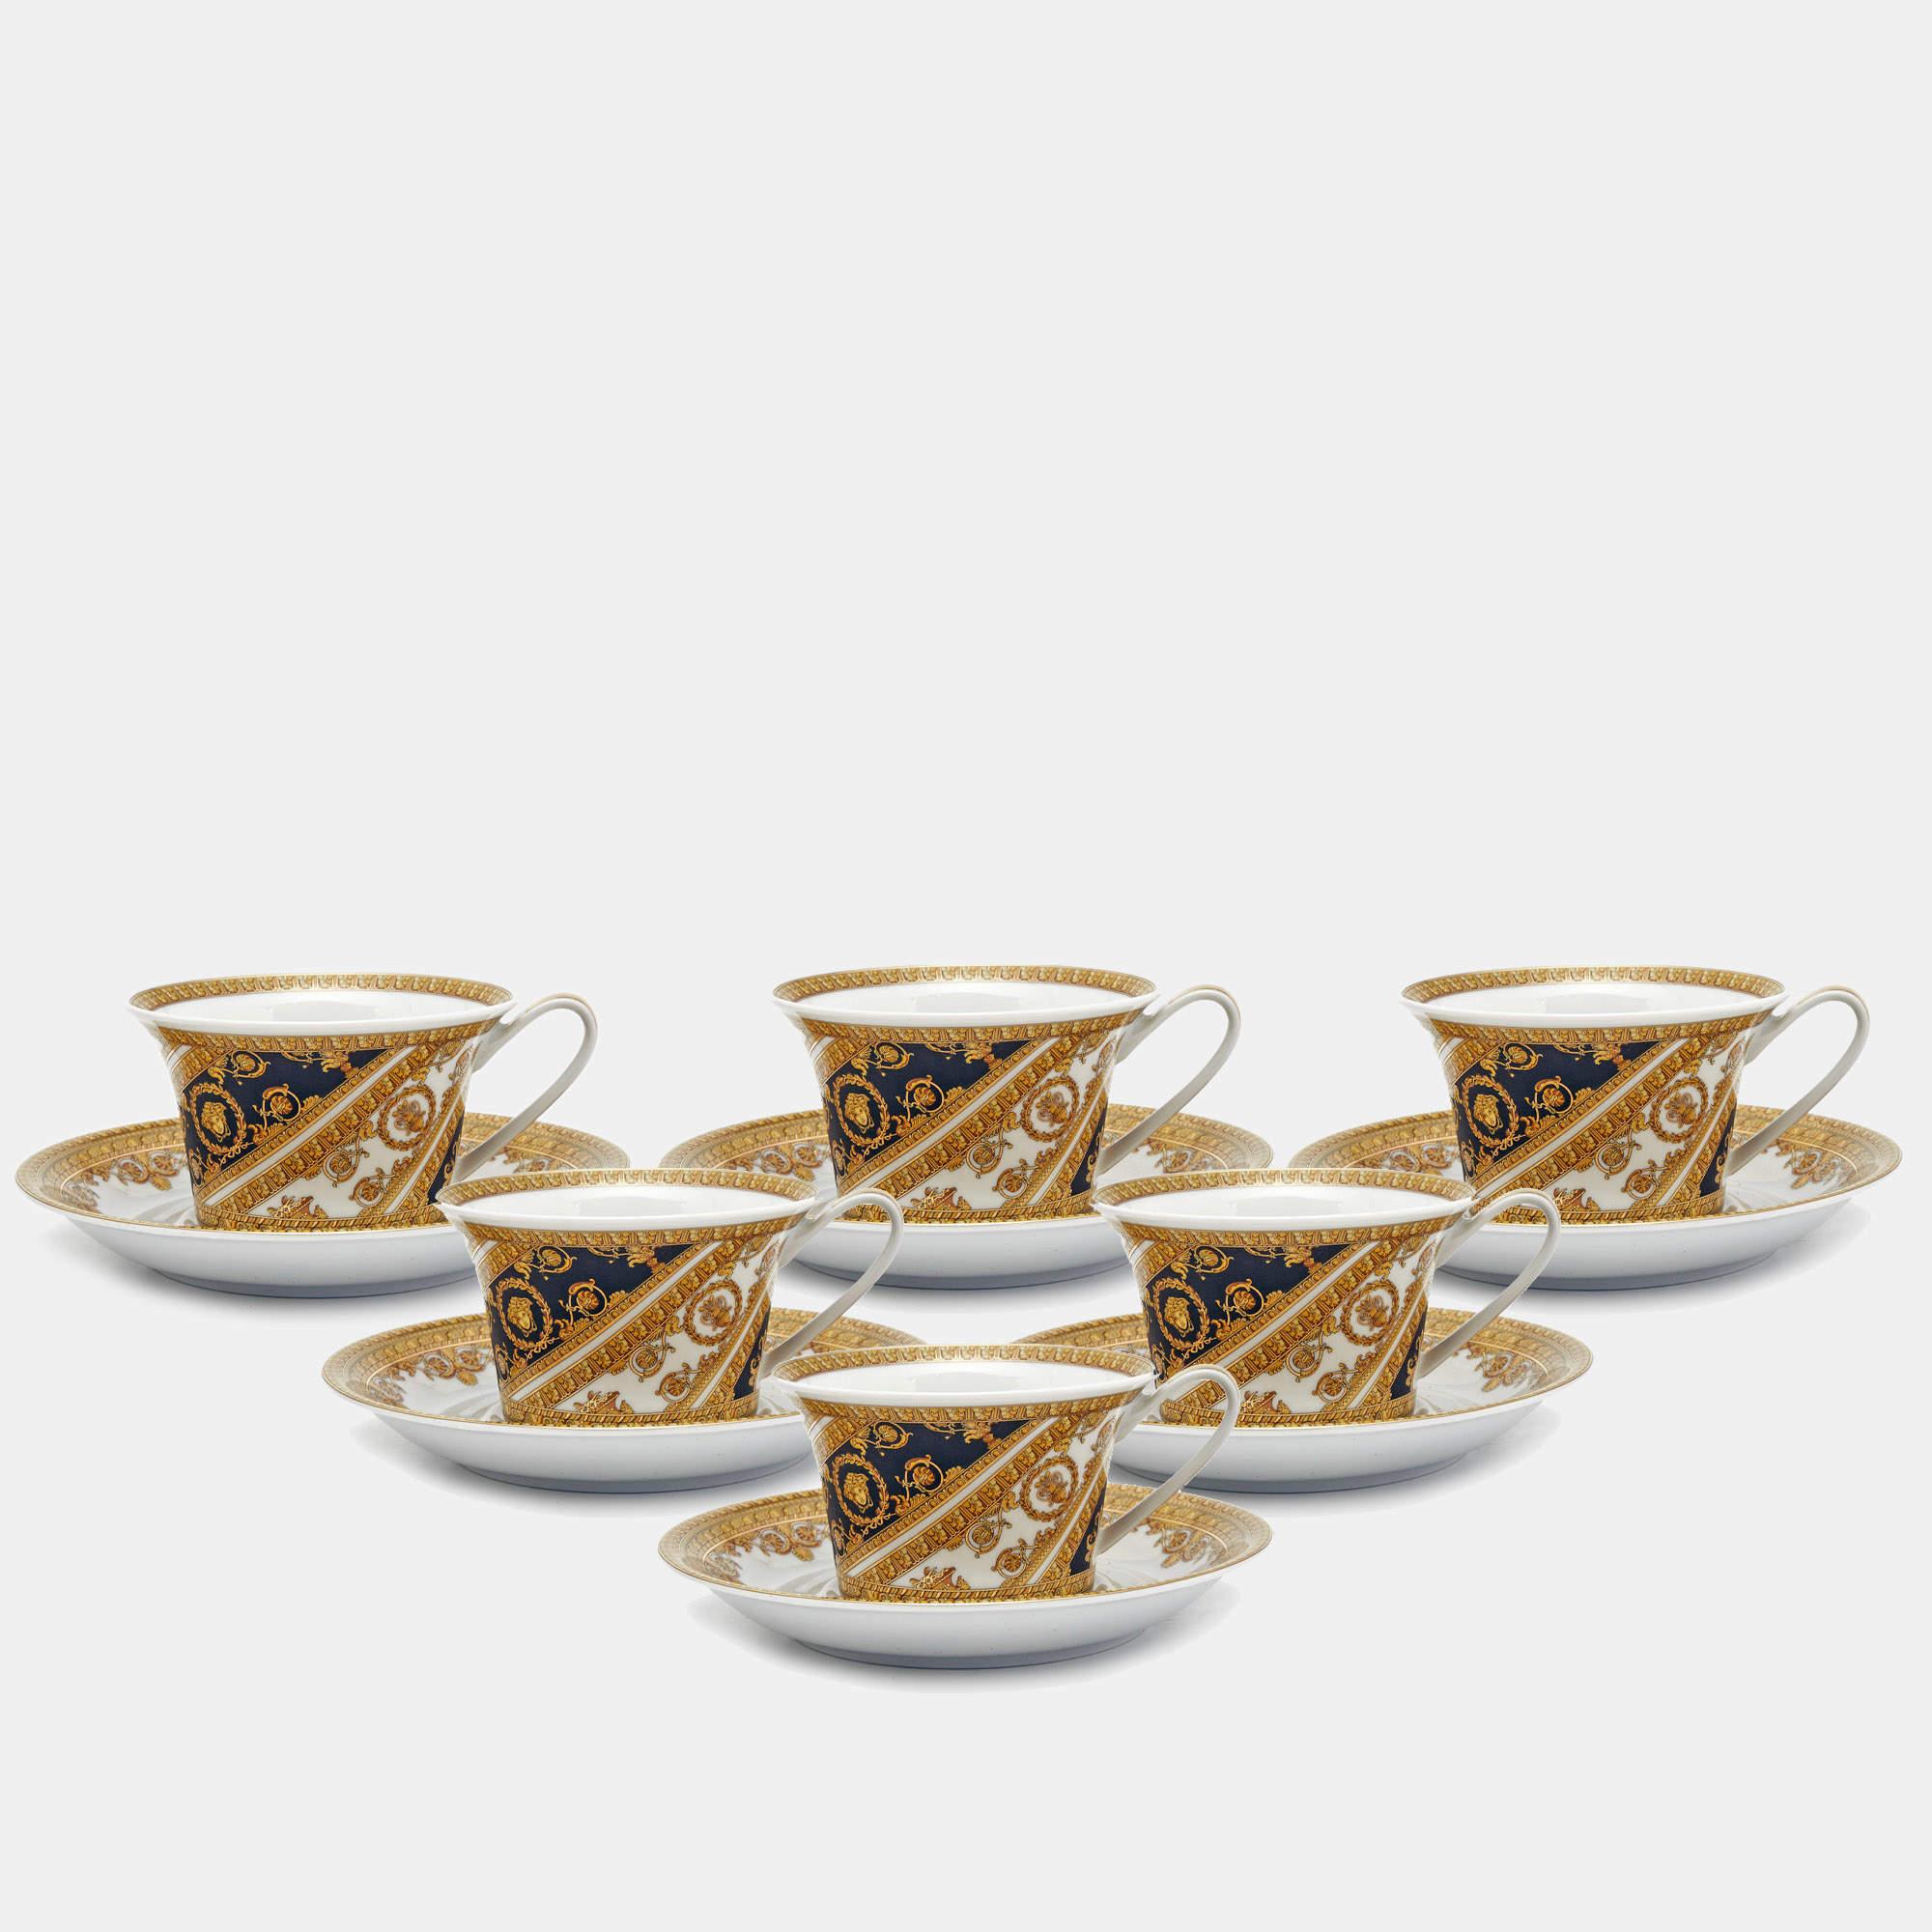 Elevate your table setting with this set of six cups and saucers by Versace x Rosenthal. Crafted excellently using high-quality porcelain, the set has House code details that have been carefully applied to project the most luxurious